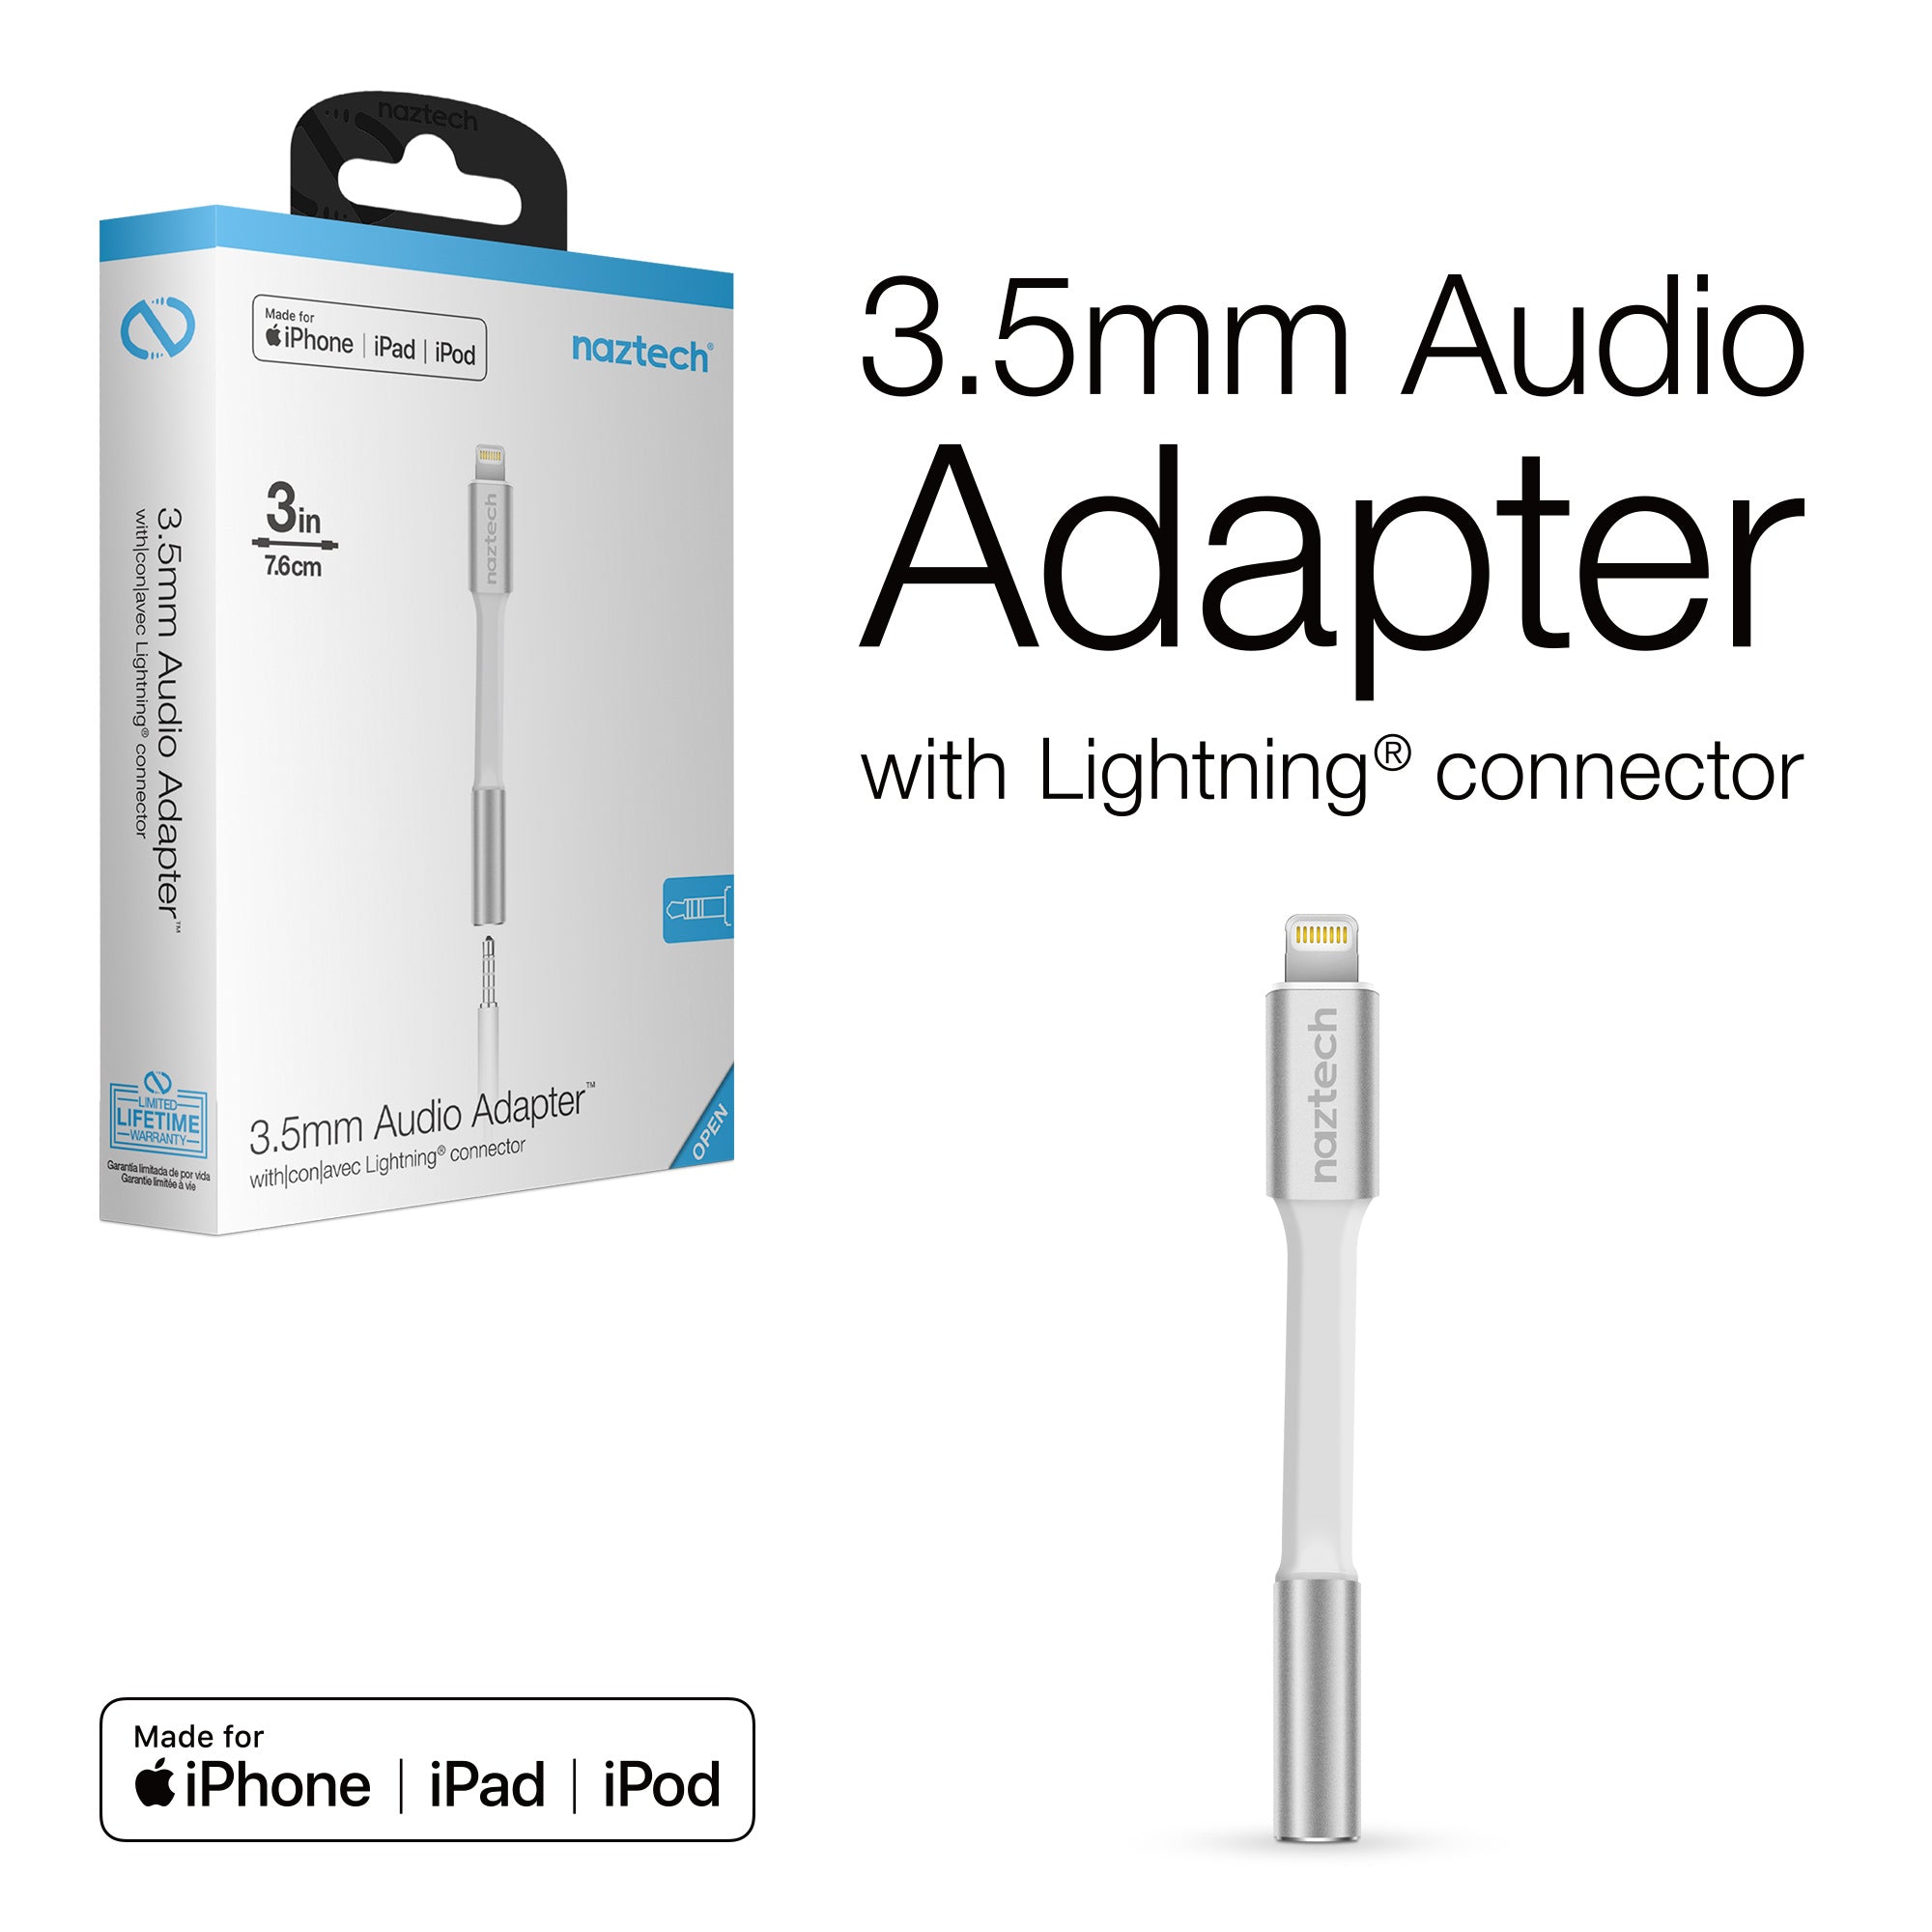 Naztech 3.5mm MFi-Certified Audio Adapter with Lightning Connector